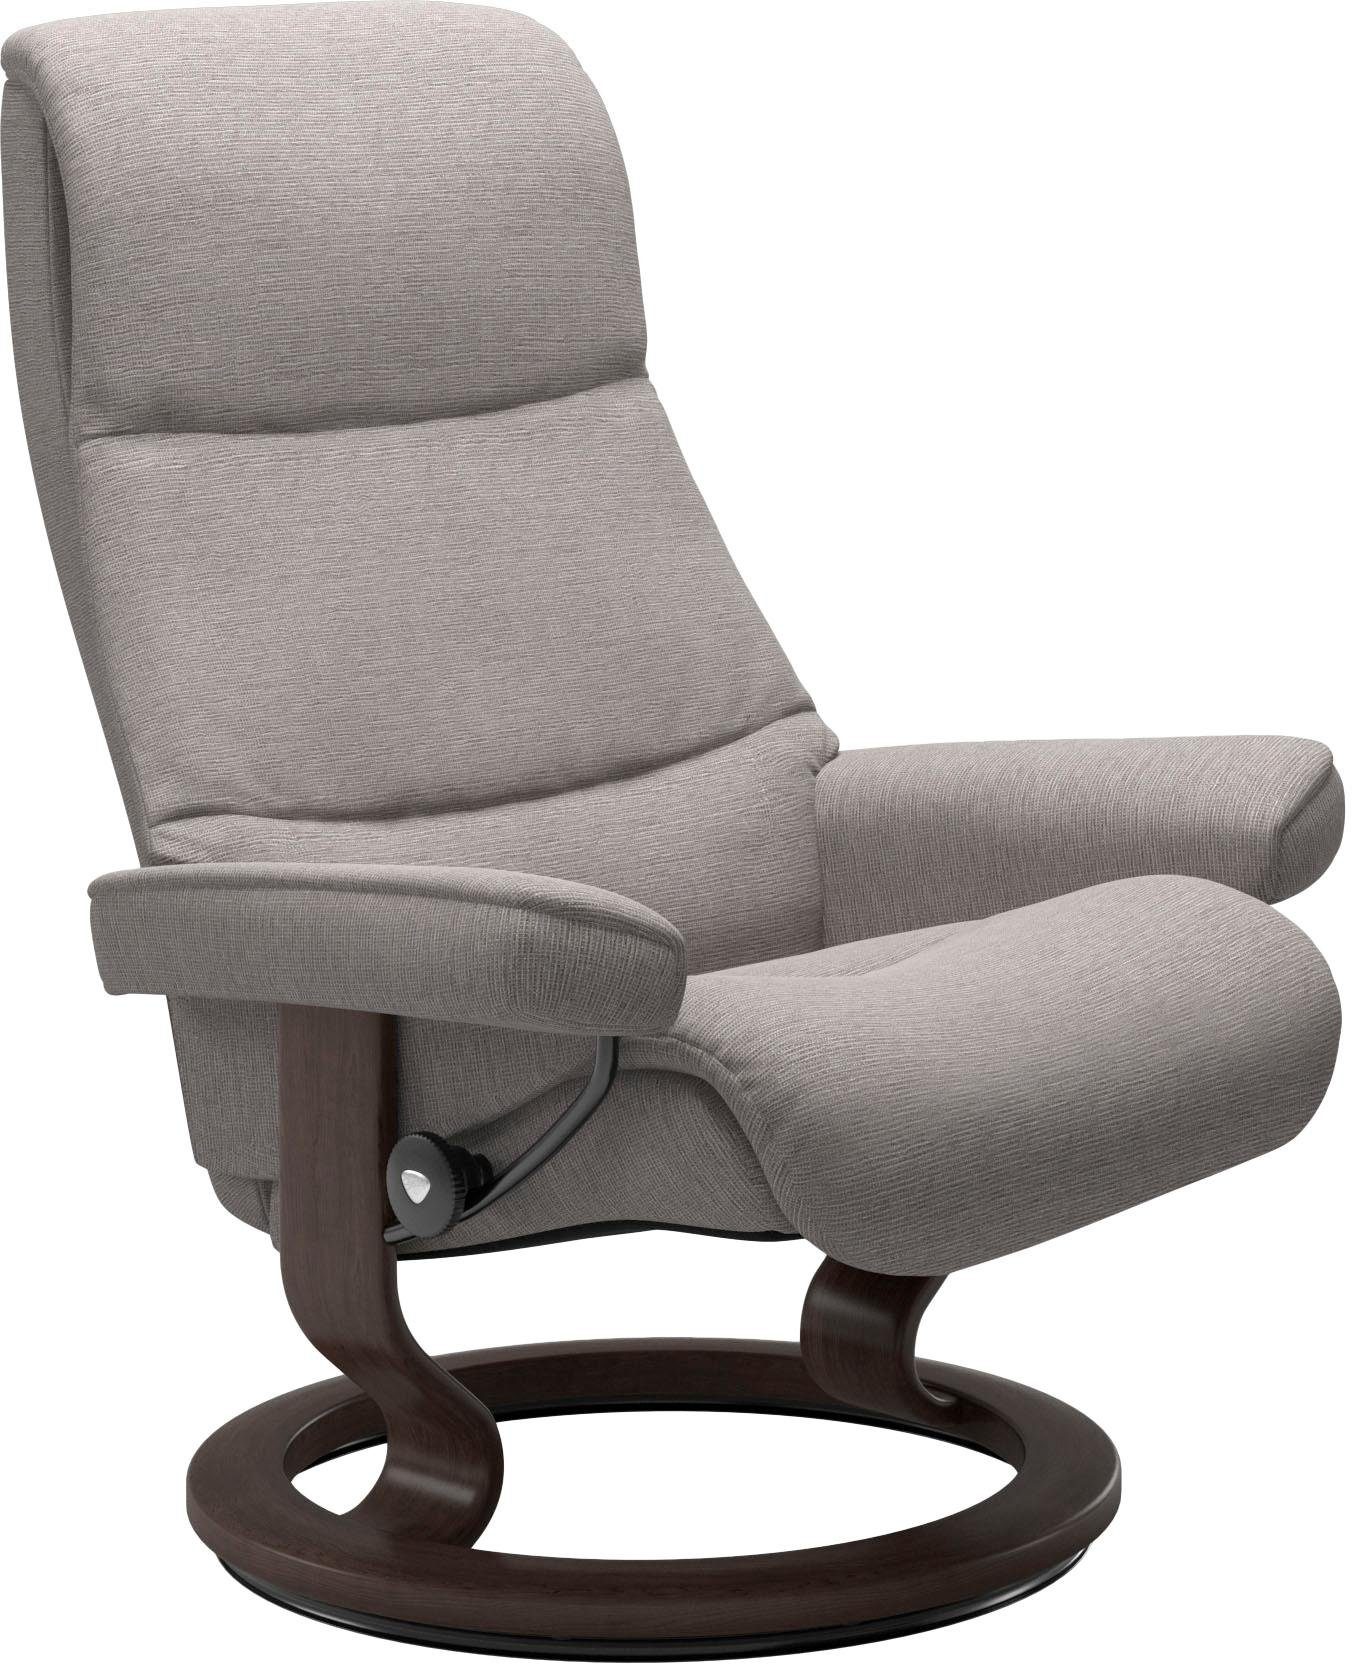 Stressless® Relaxsessel View, Classic Größe Wenge mit Base, M,Gestell